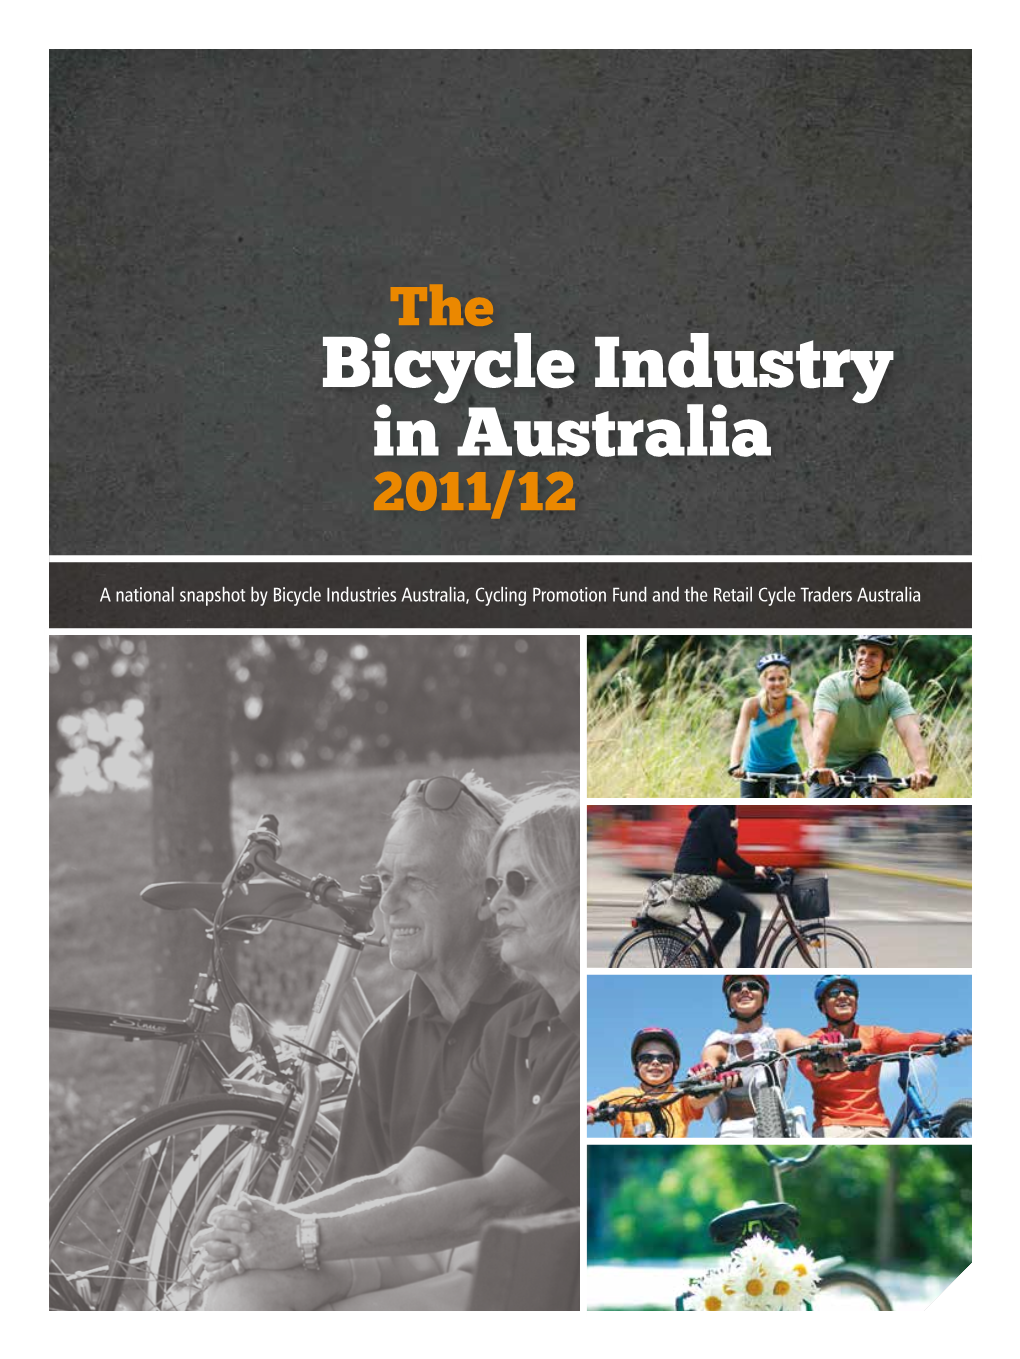 Bicycle Industry in Australia 2011/12